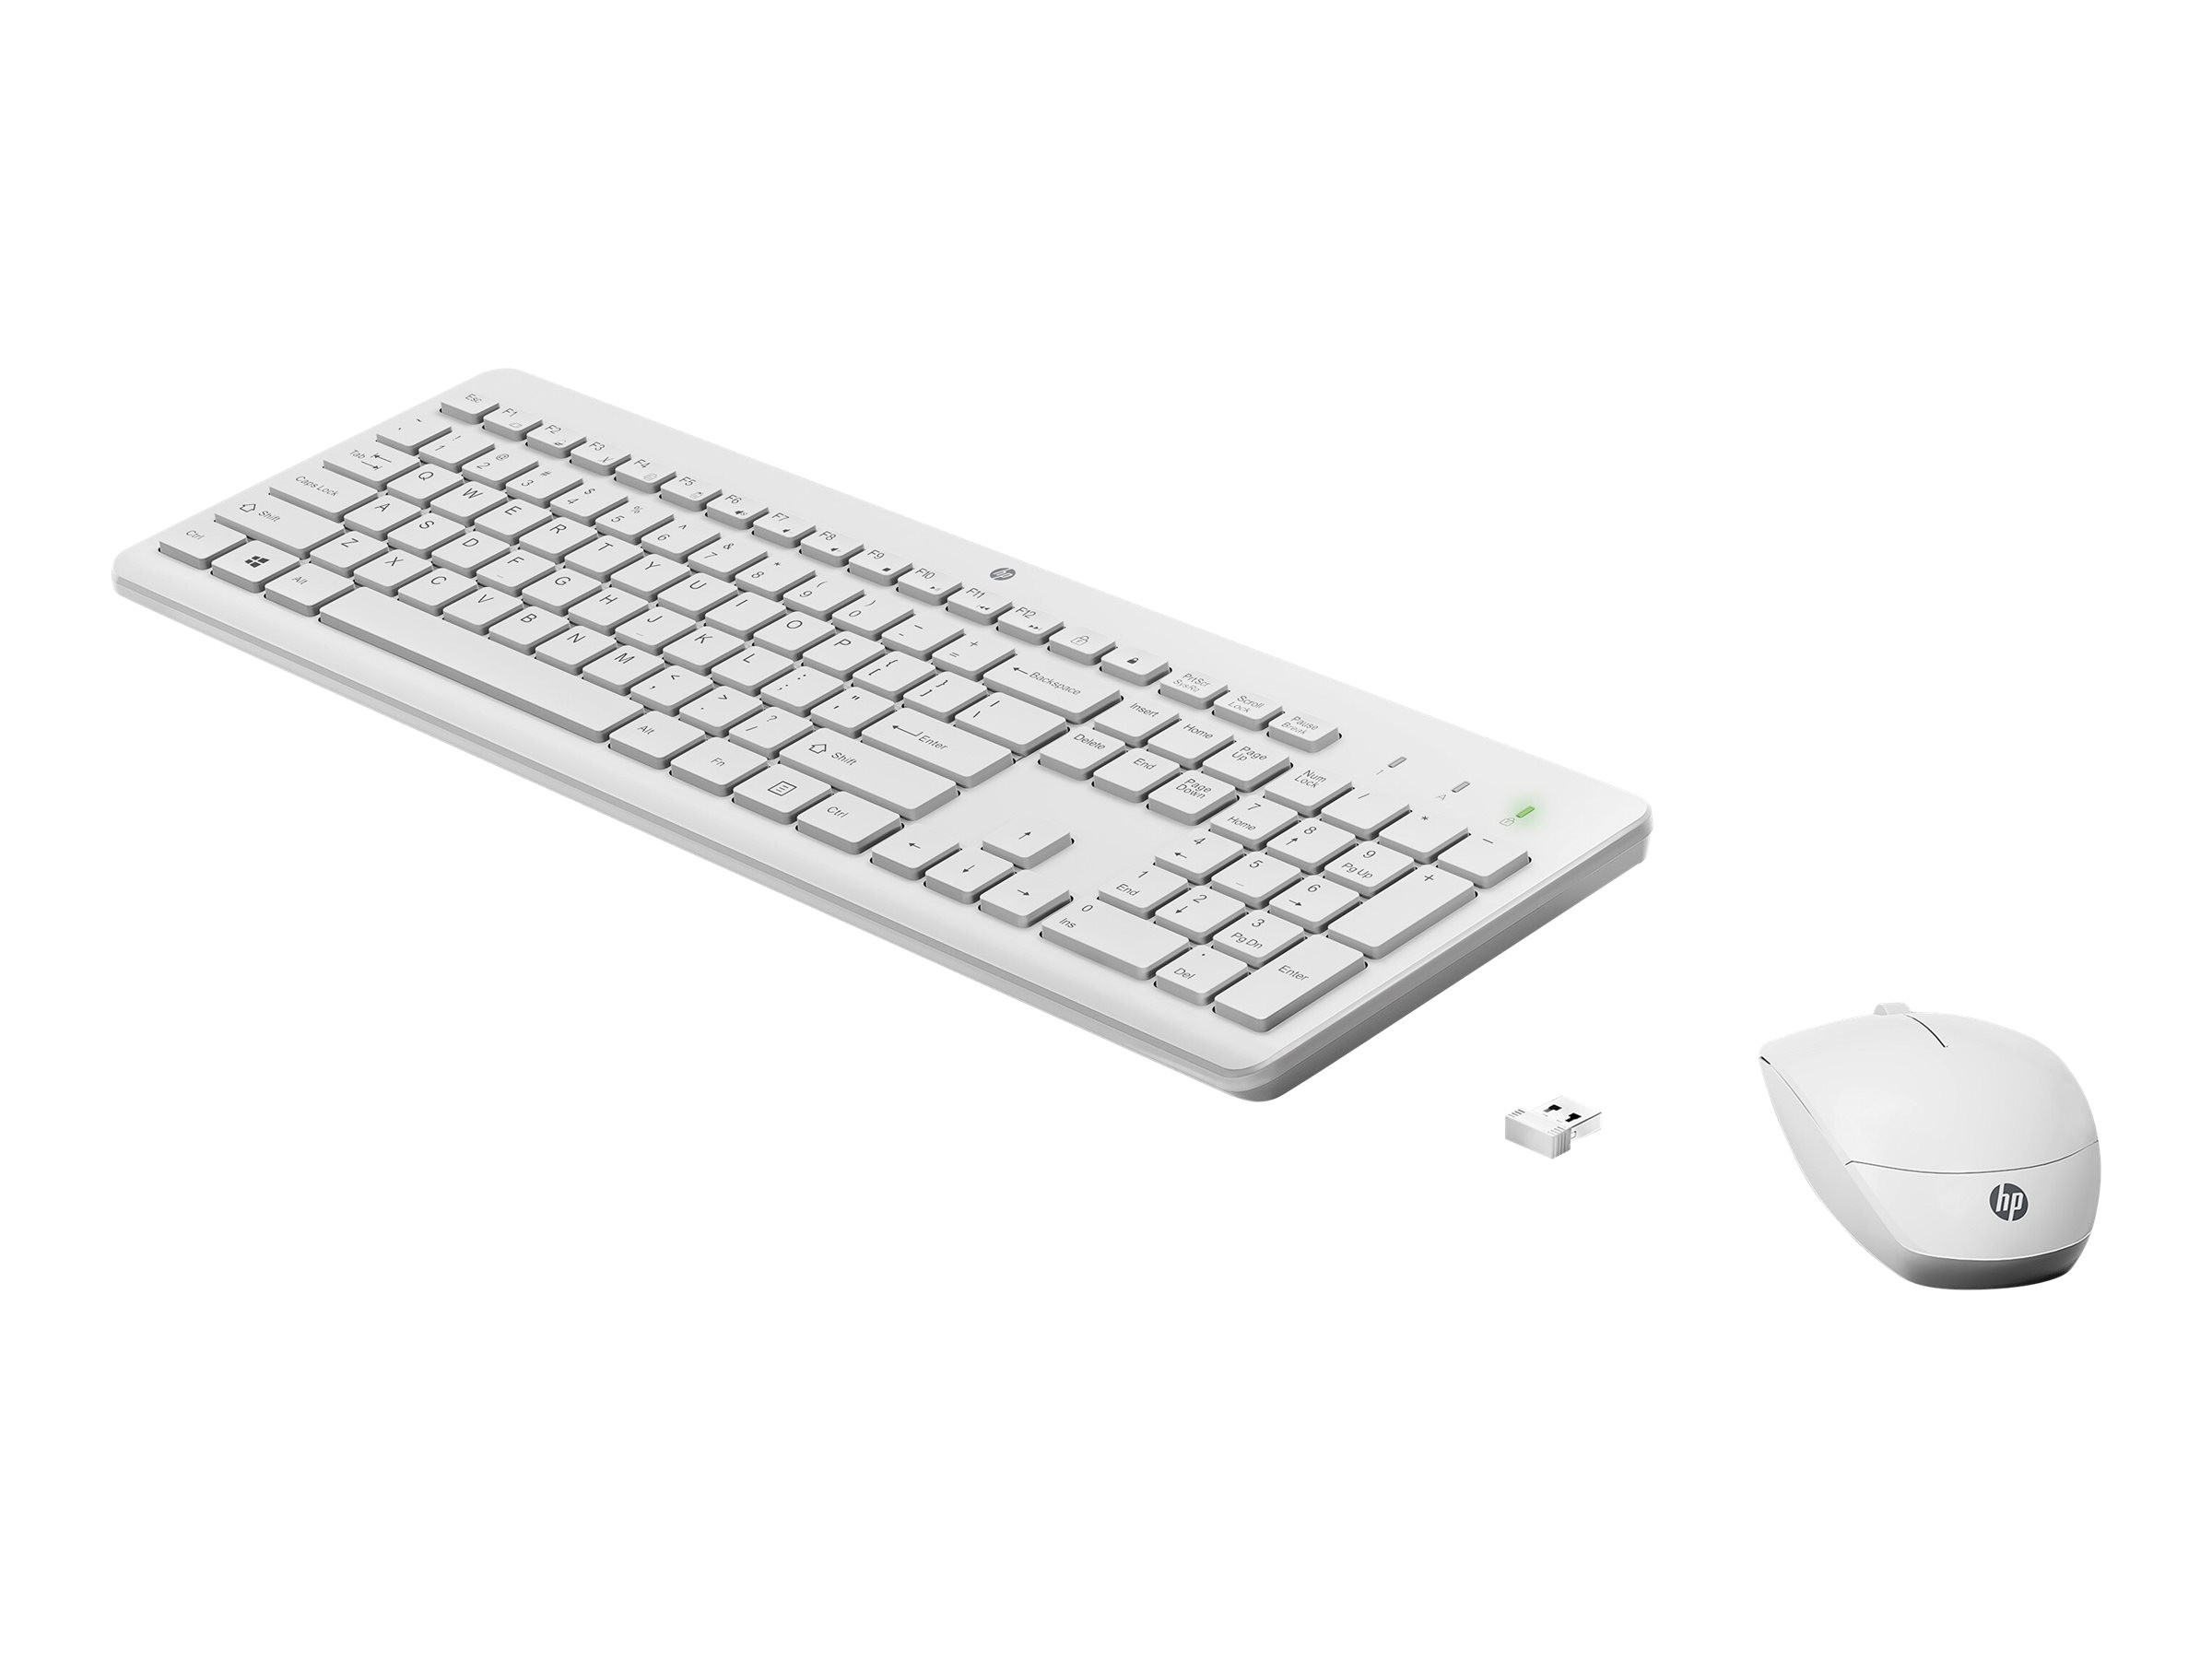 HP 3L1F0AA#ABD | and Wireless Combo 230 HP Mouse Keyboard